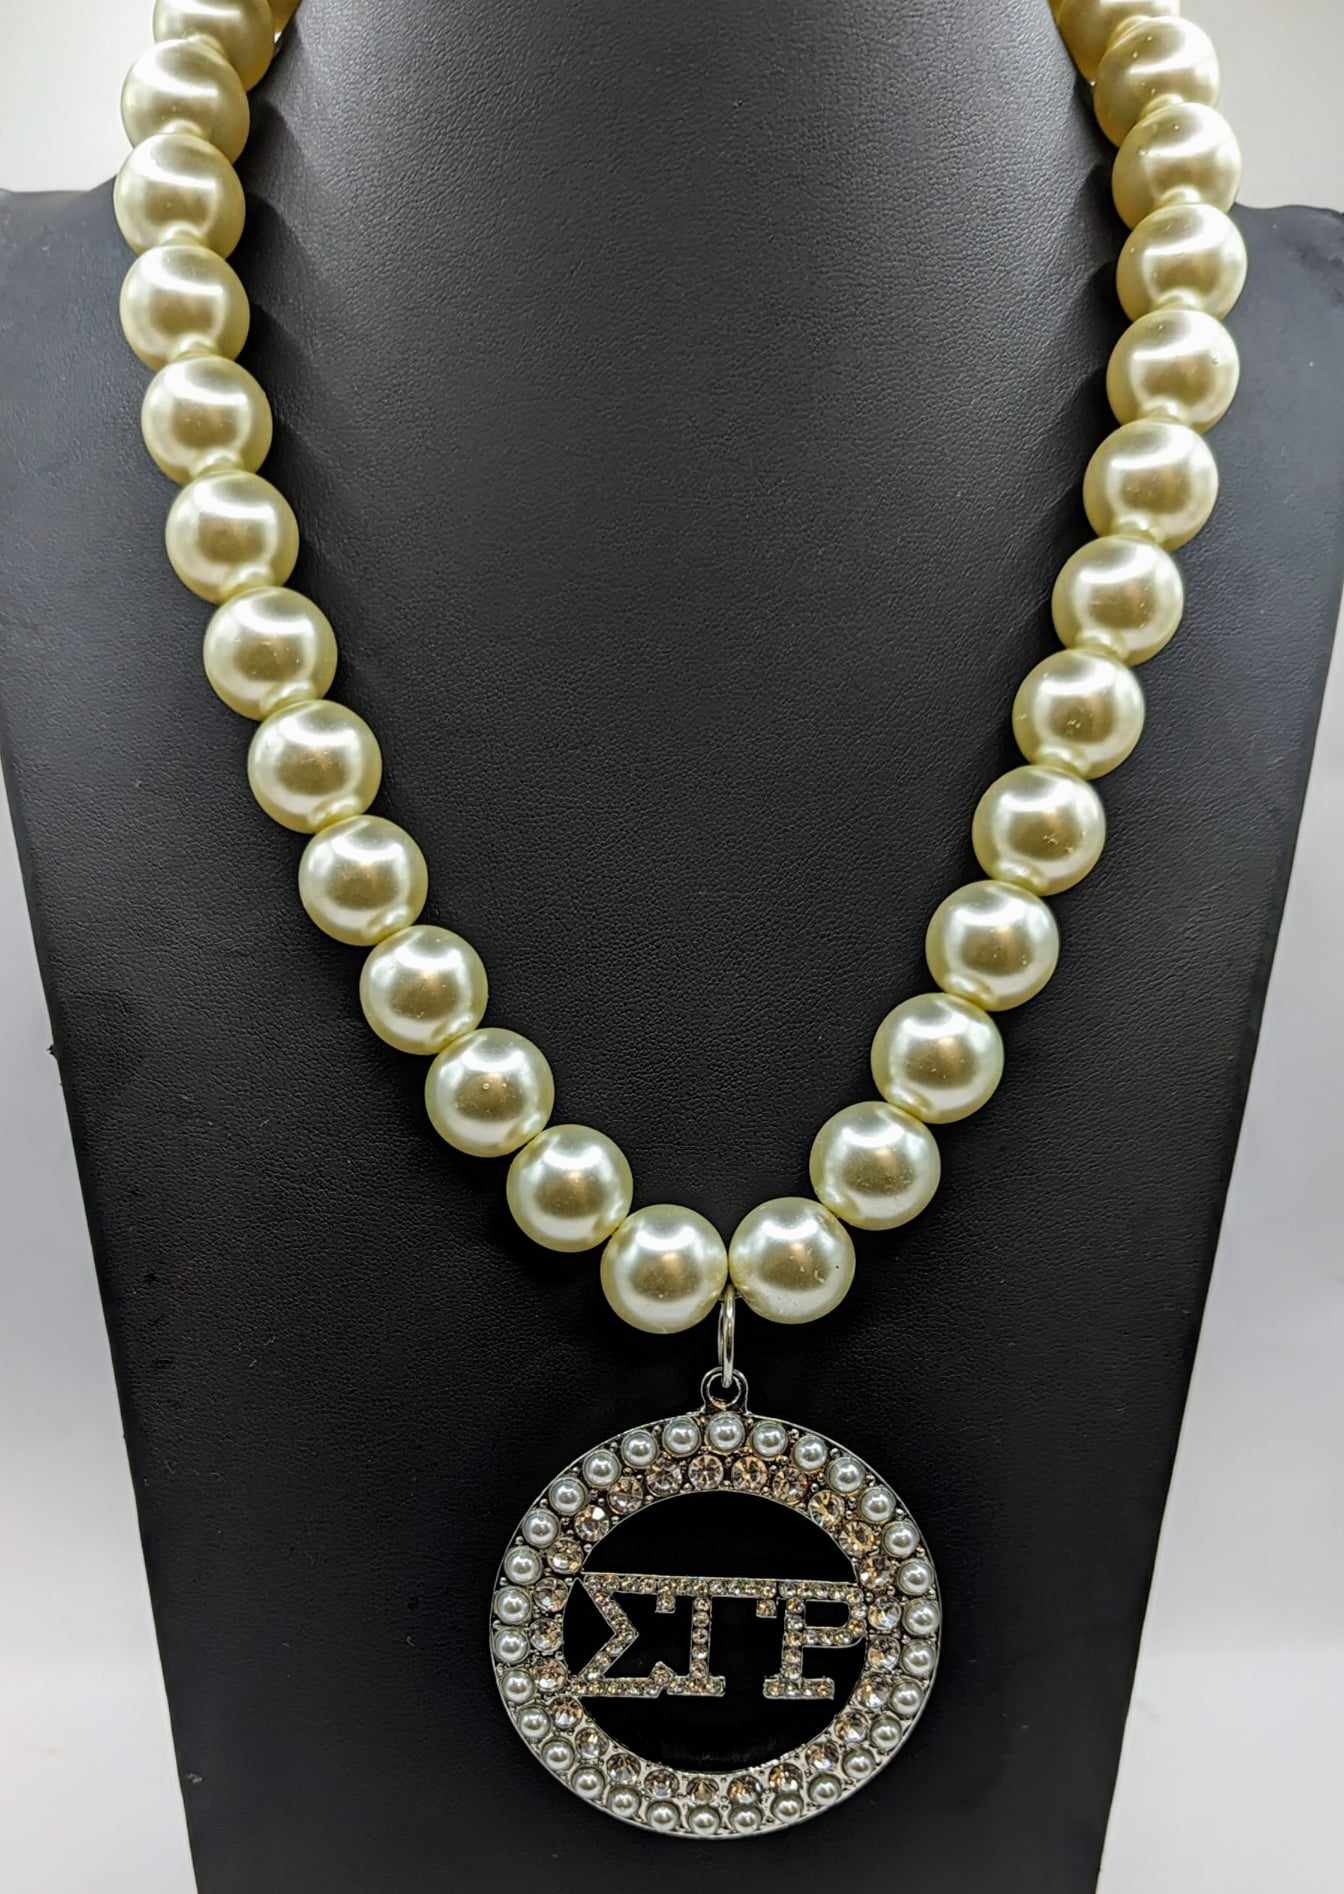 Sigma Gamma Rho Pearl & Bling Necklace - Diva Starr Boutique